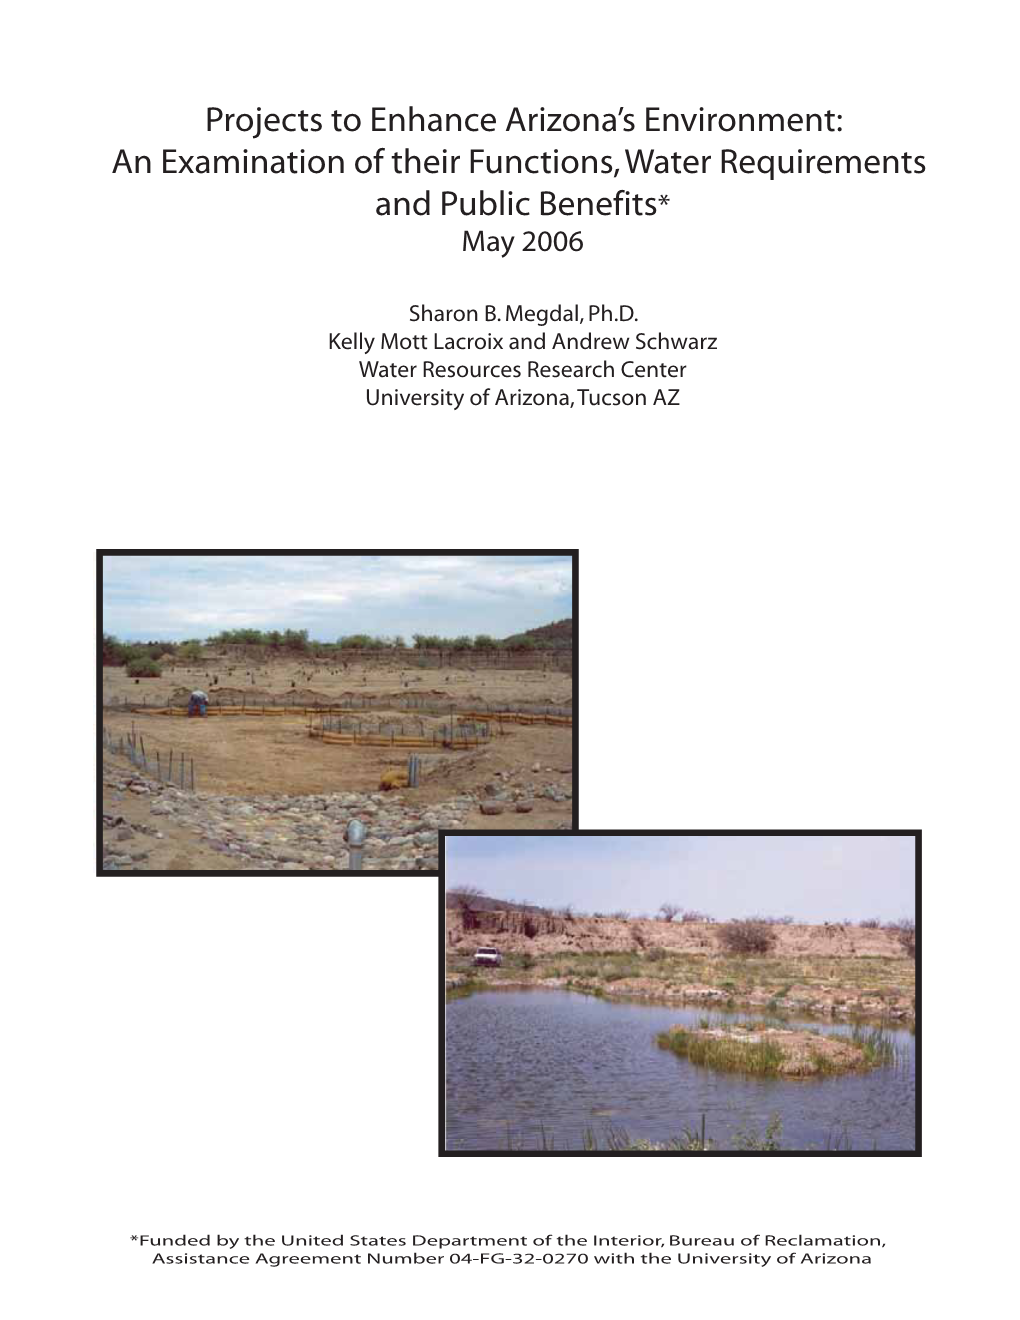 Projects to Enhance Arizona's Environment: an Examination of Their Function, Water Requirements and Public Benefits"